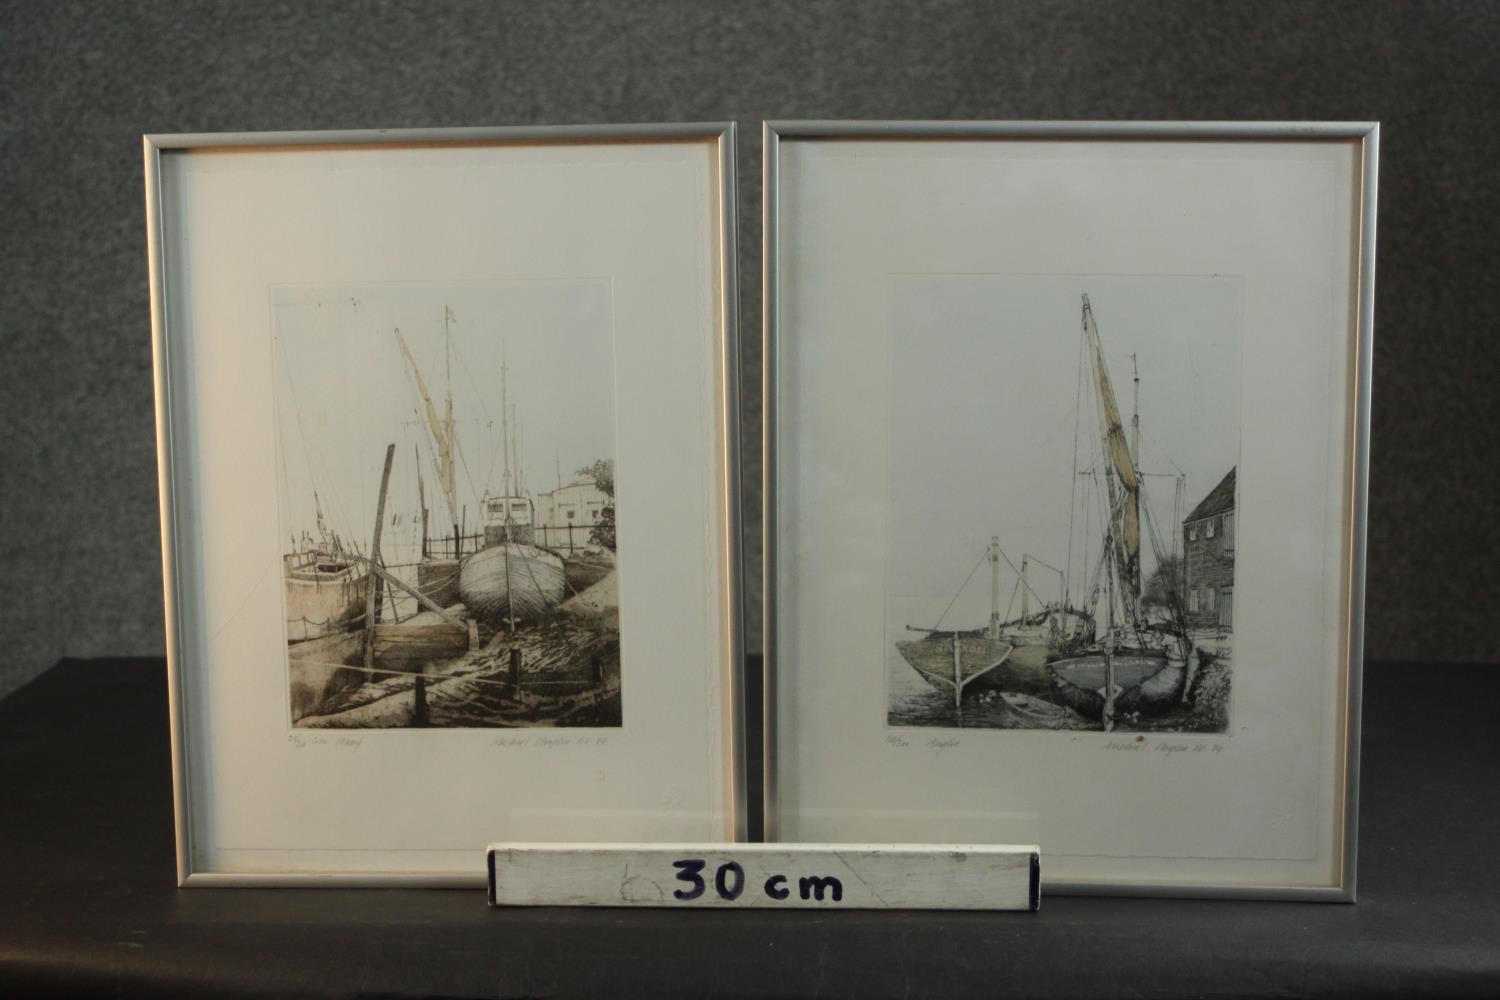 Michael Chaplin RE (British b1943) 'Iron Wharf' and 'Anglia', etching and aquatint, signed, titled - Image 2 of 9